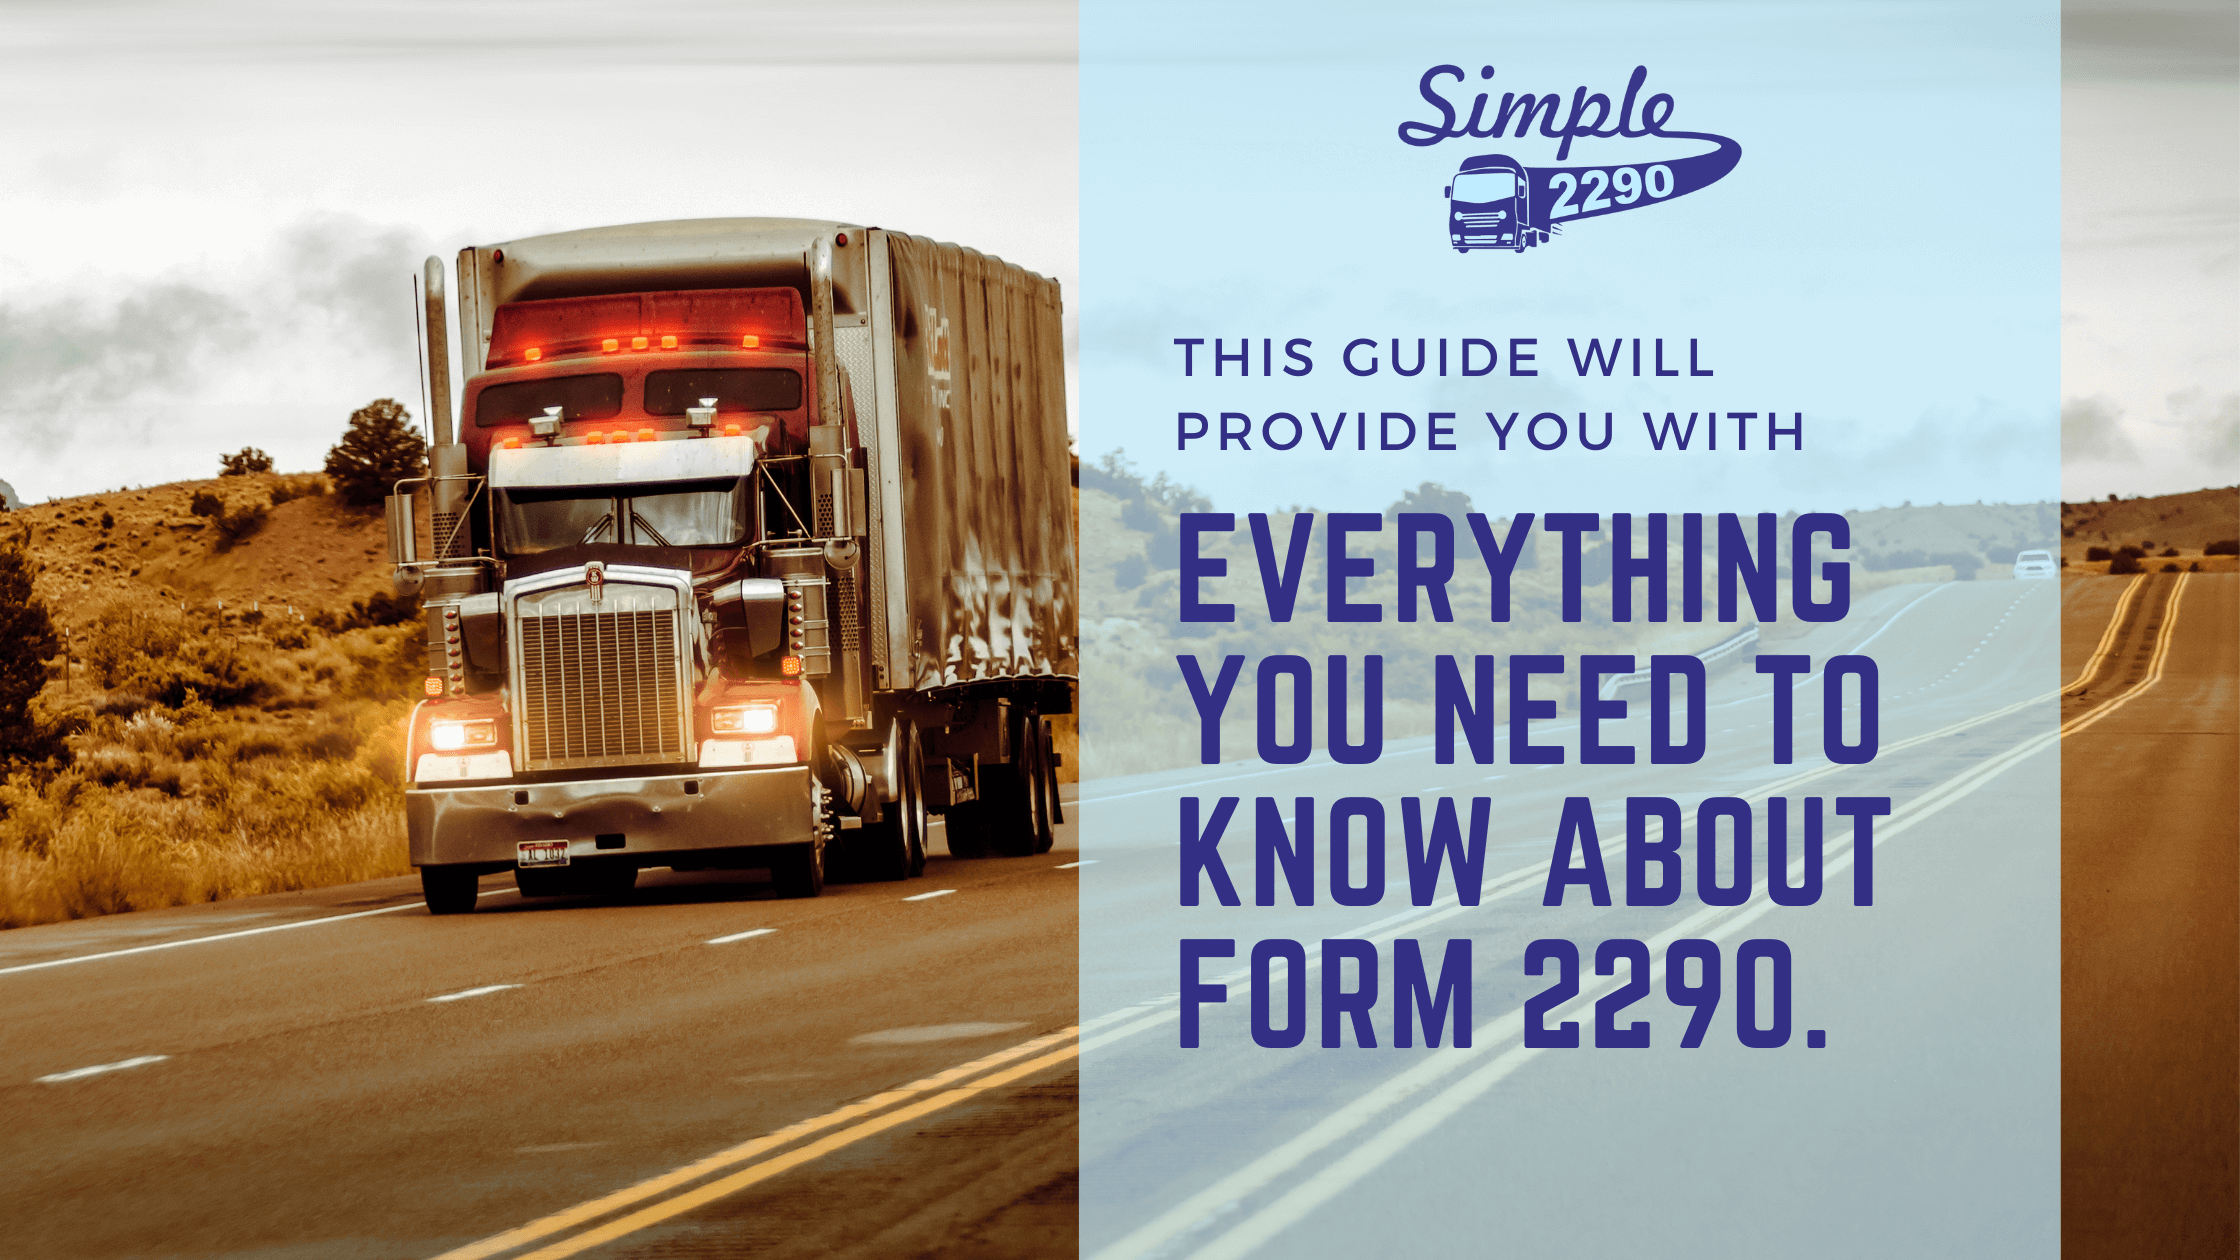 This guide will provide you with everything you need to know about Form 2290.